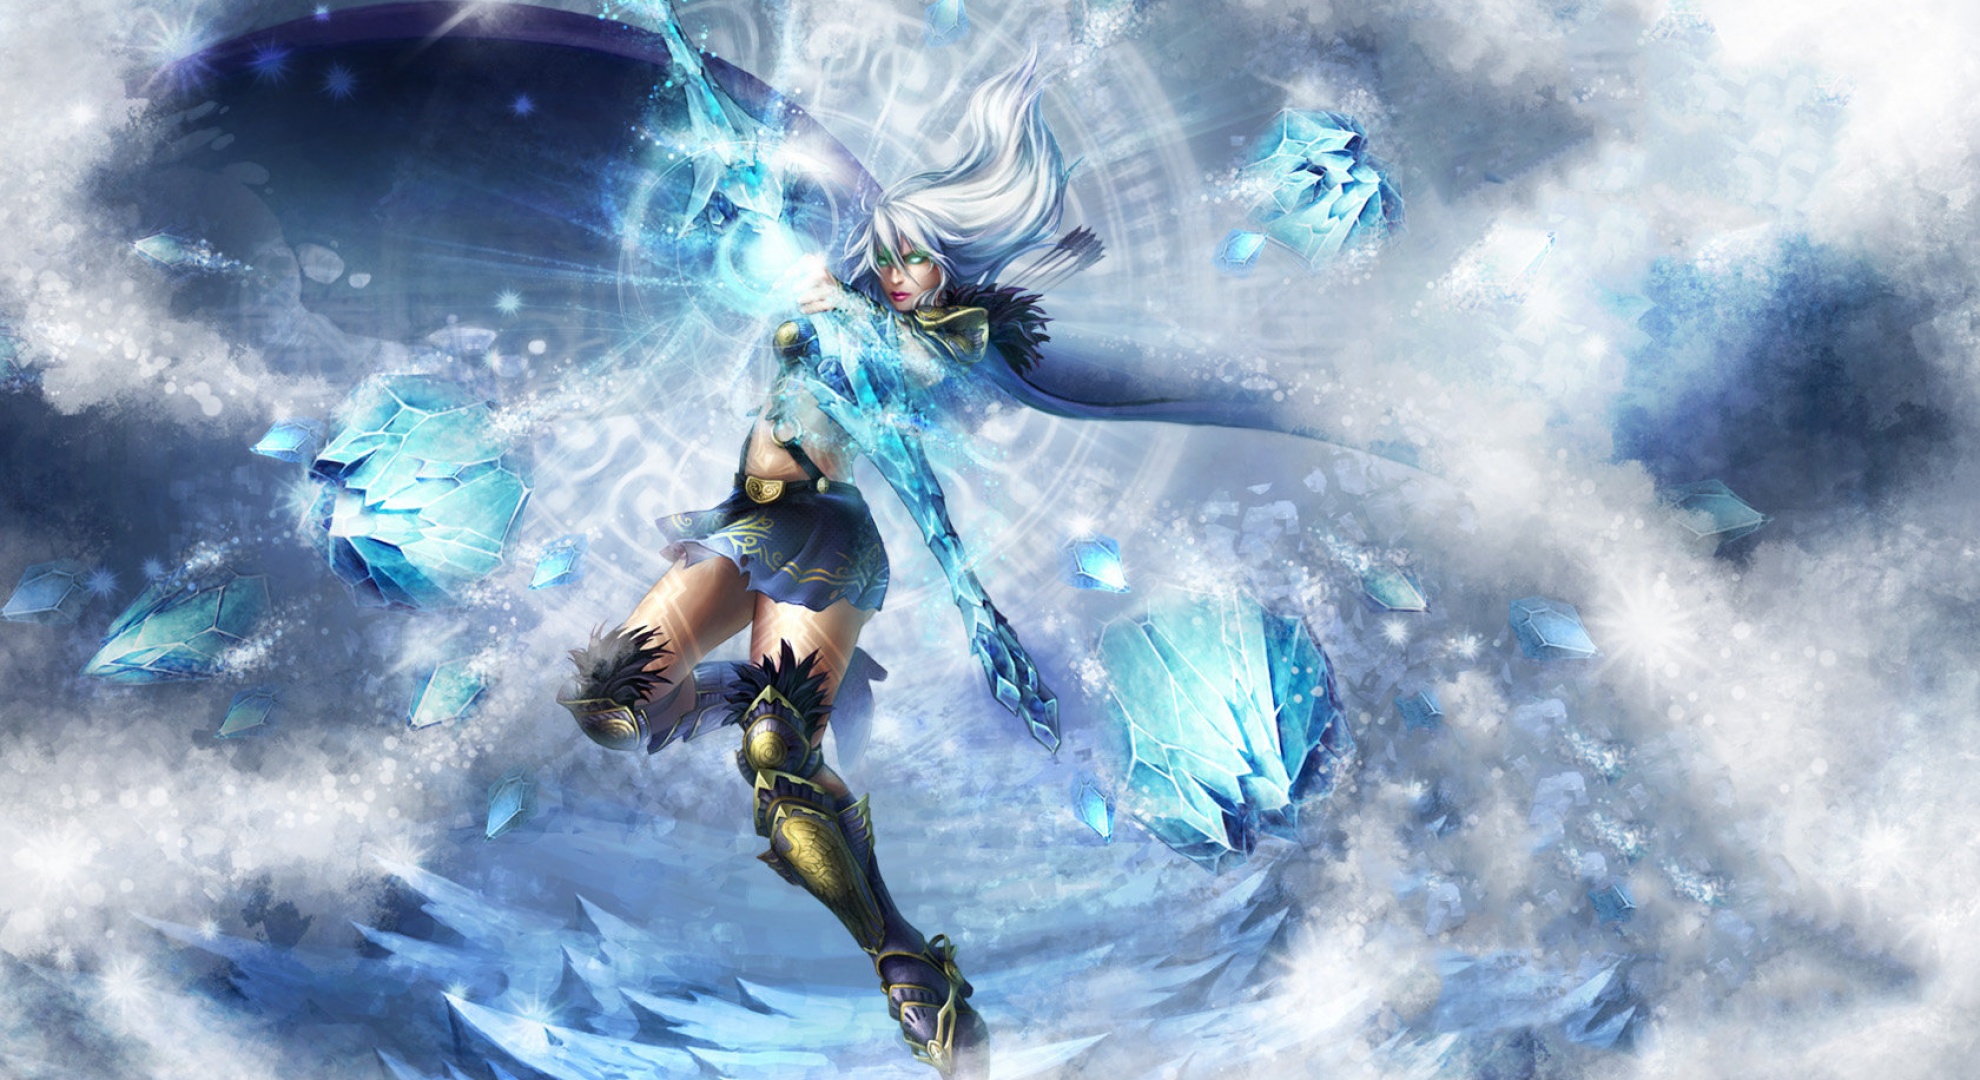 League of Legends character, Ashe, in epic action as a powerful archer.